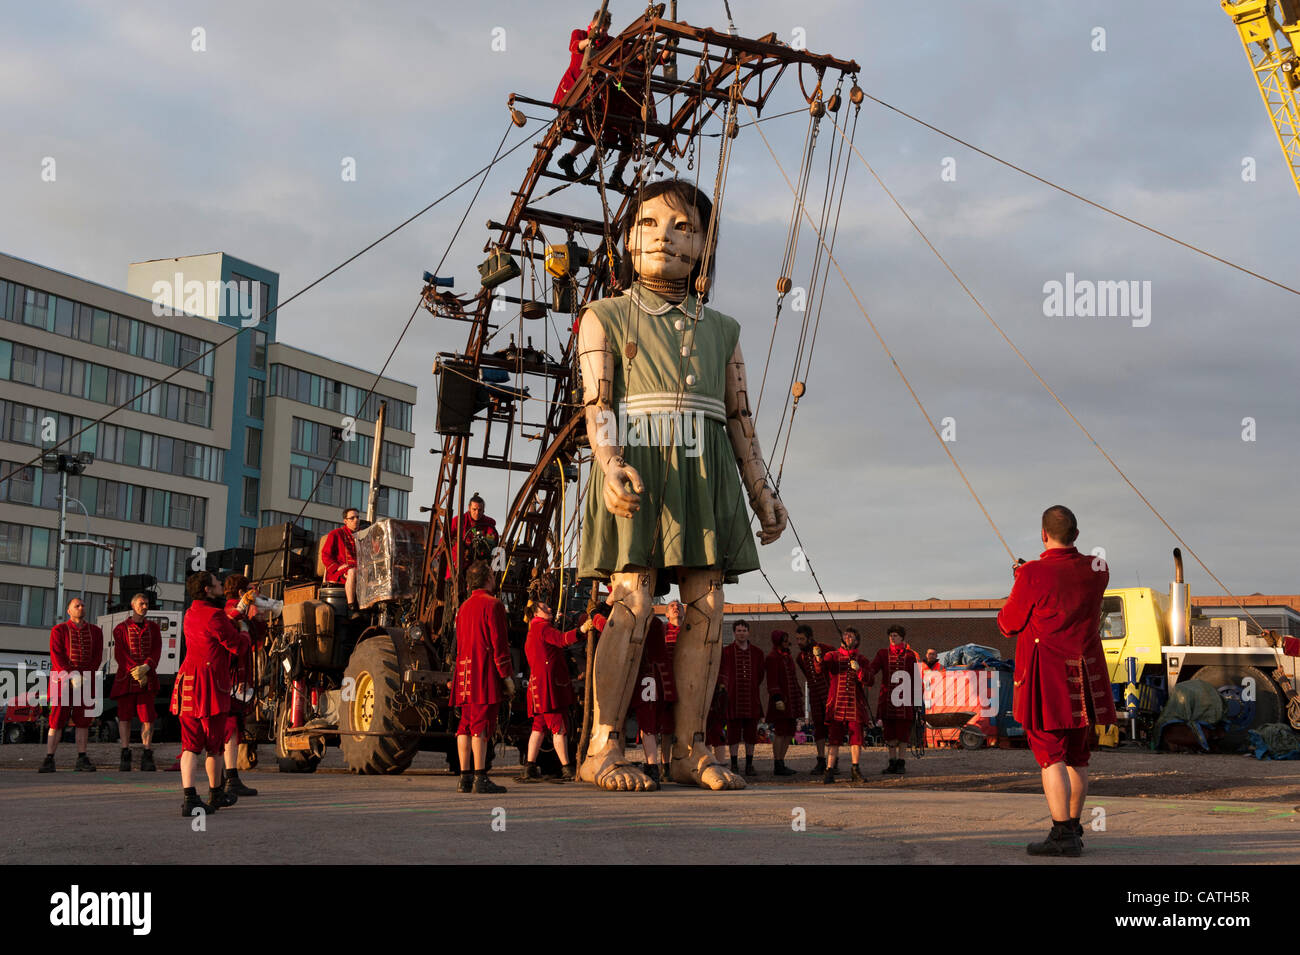 LIVERPOOL, UK, 20th April, 2012. The Sea Odyssey. The little girl giant. A massive puppet by Royal de Luxe as part of the Sea Odyssey event. Stock Photo